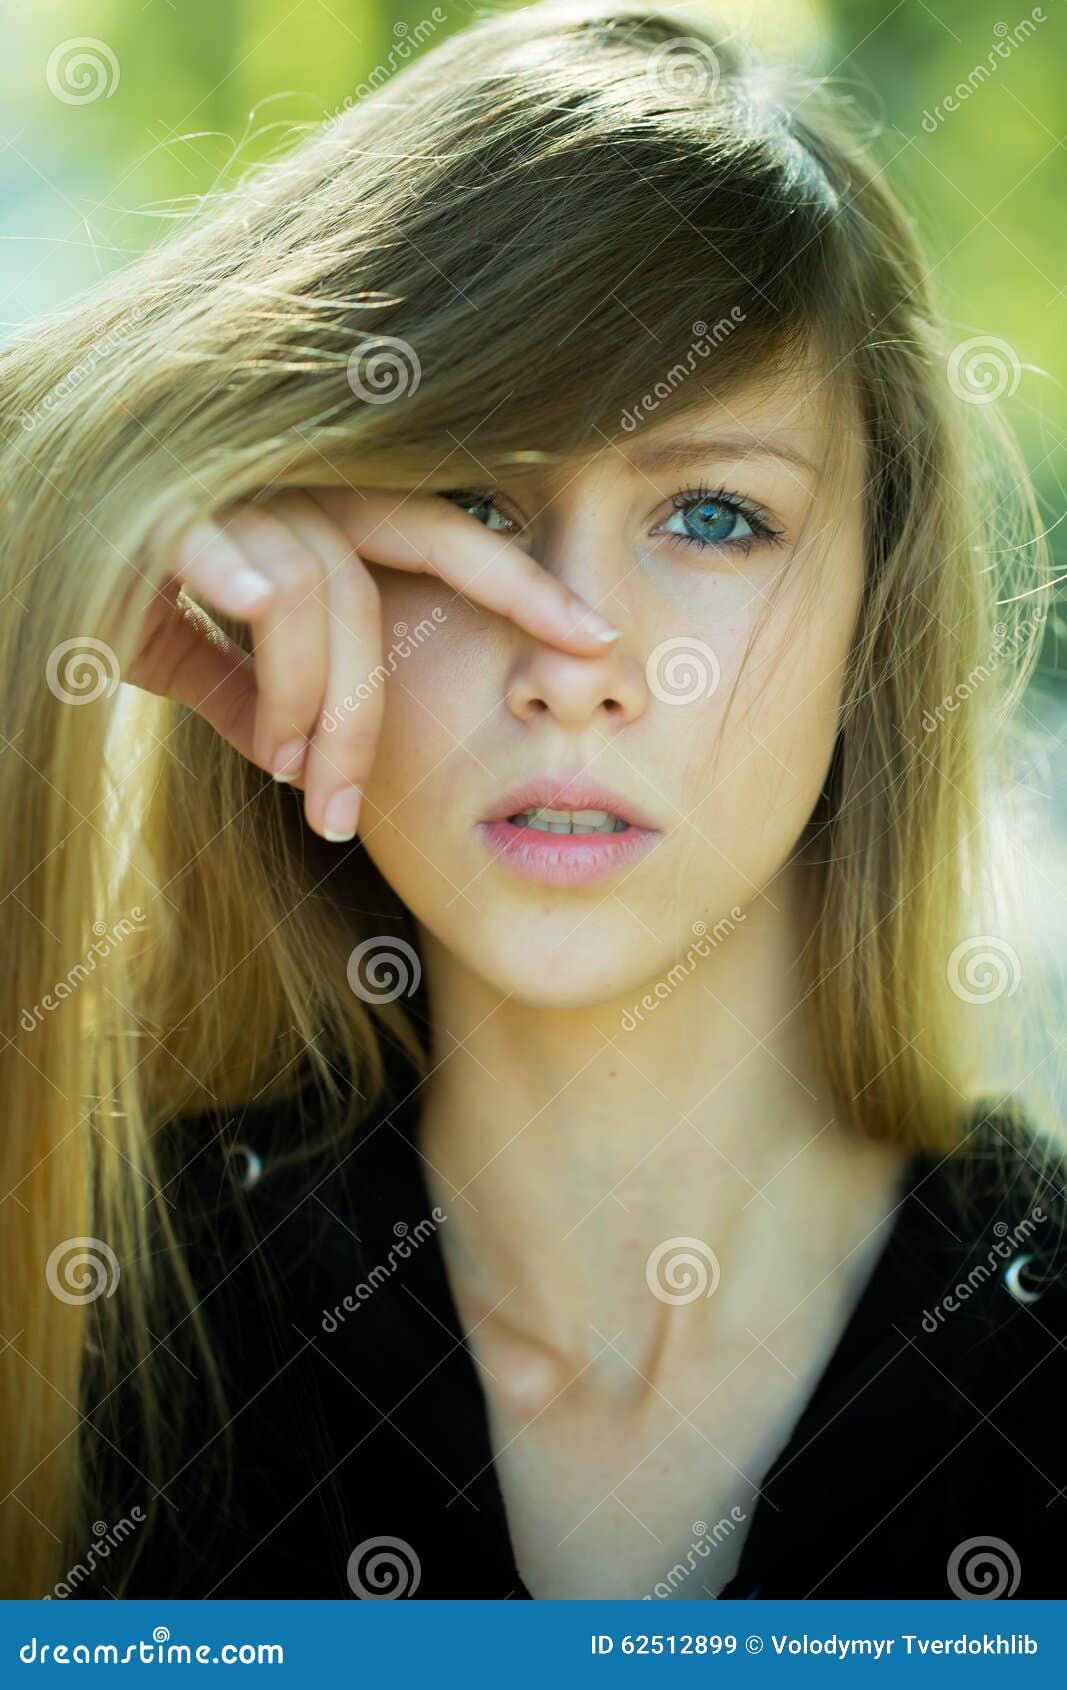 Girl with finger on nose stock image. Image of falling - 62512899